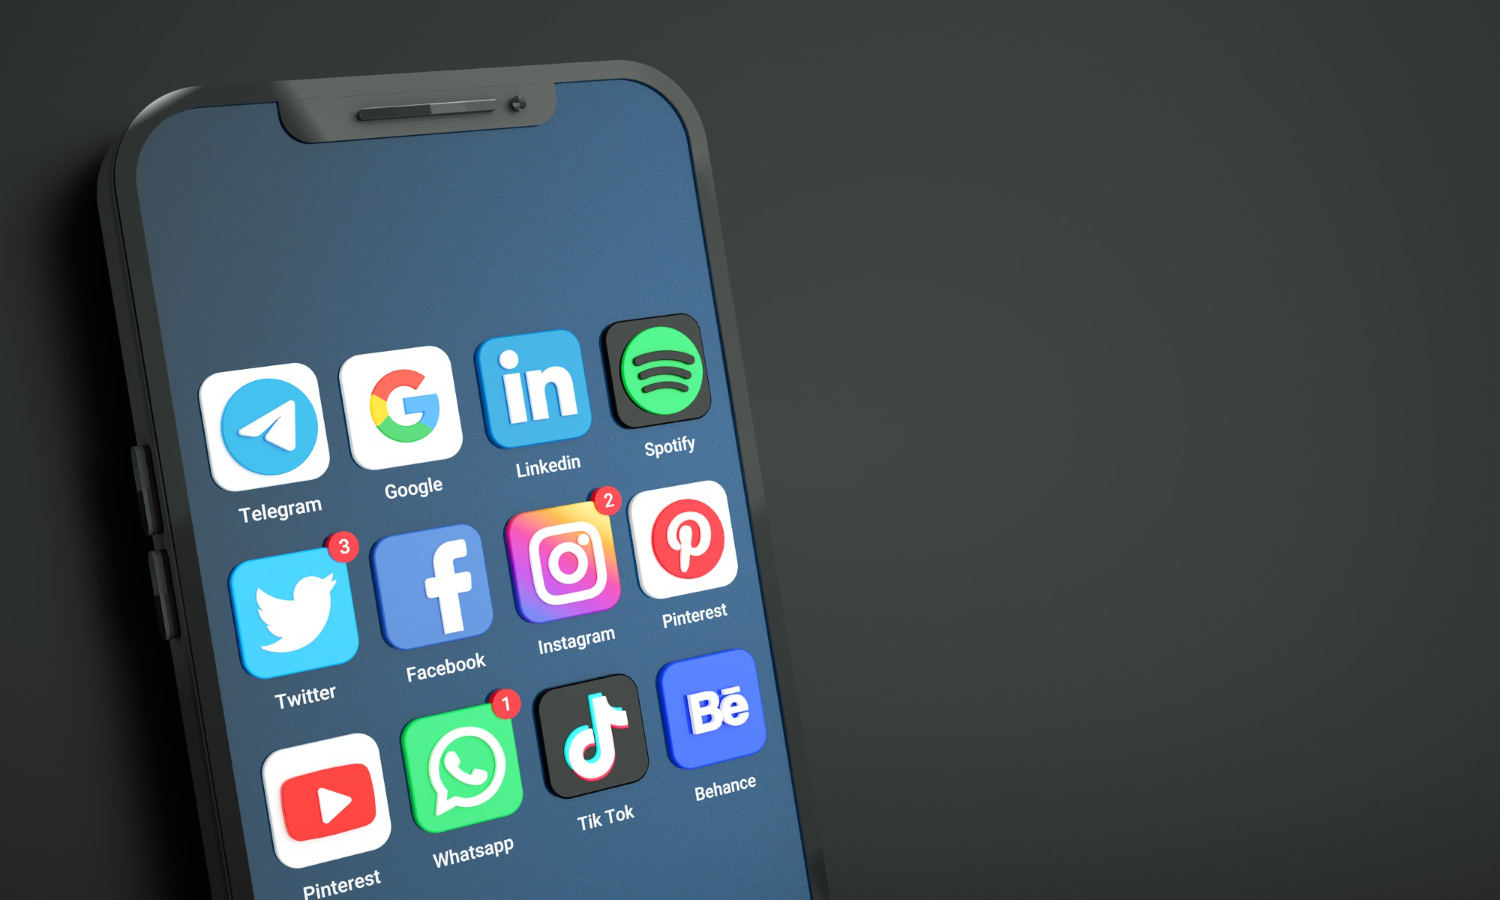 most popular social media icons logos mobile phone screen with copy space text